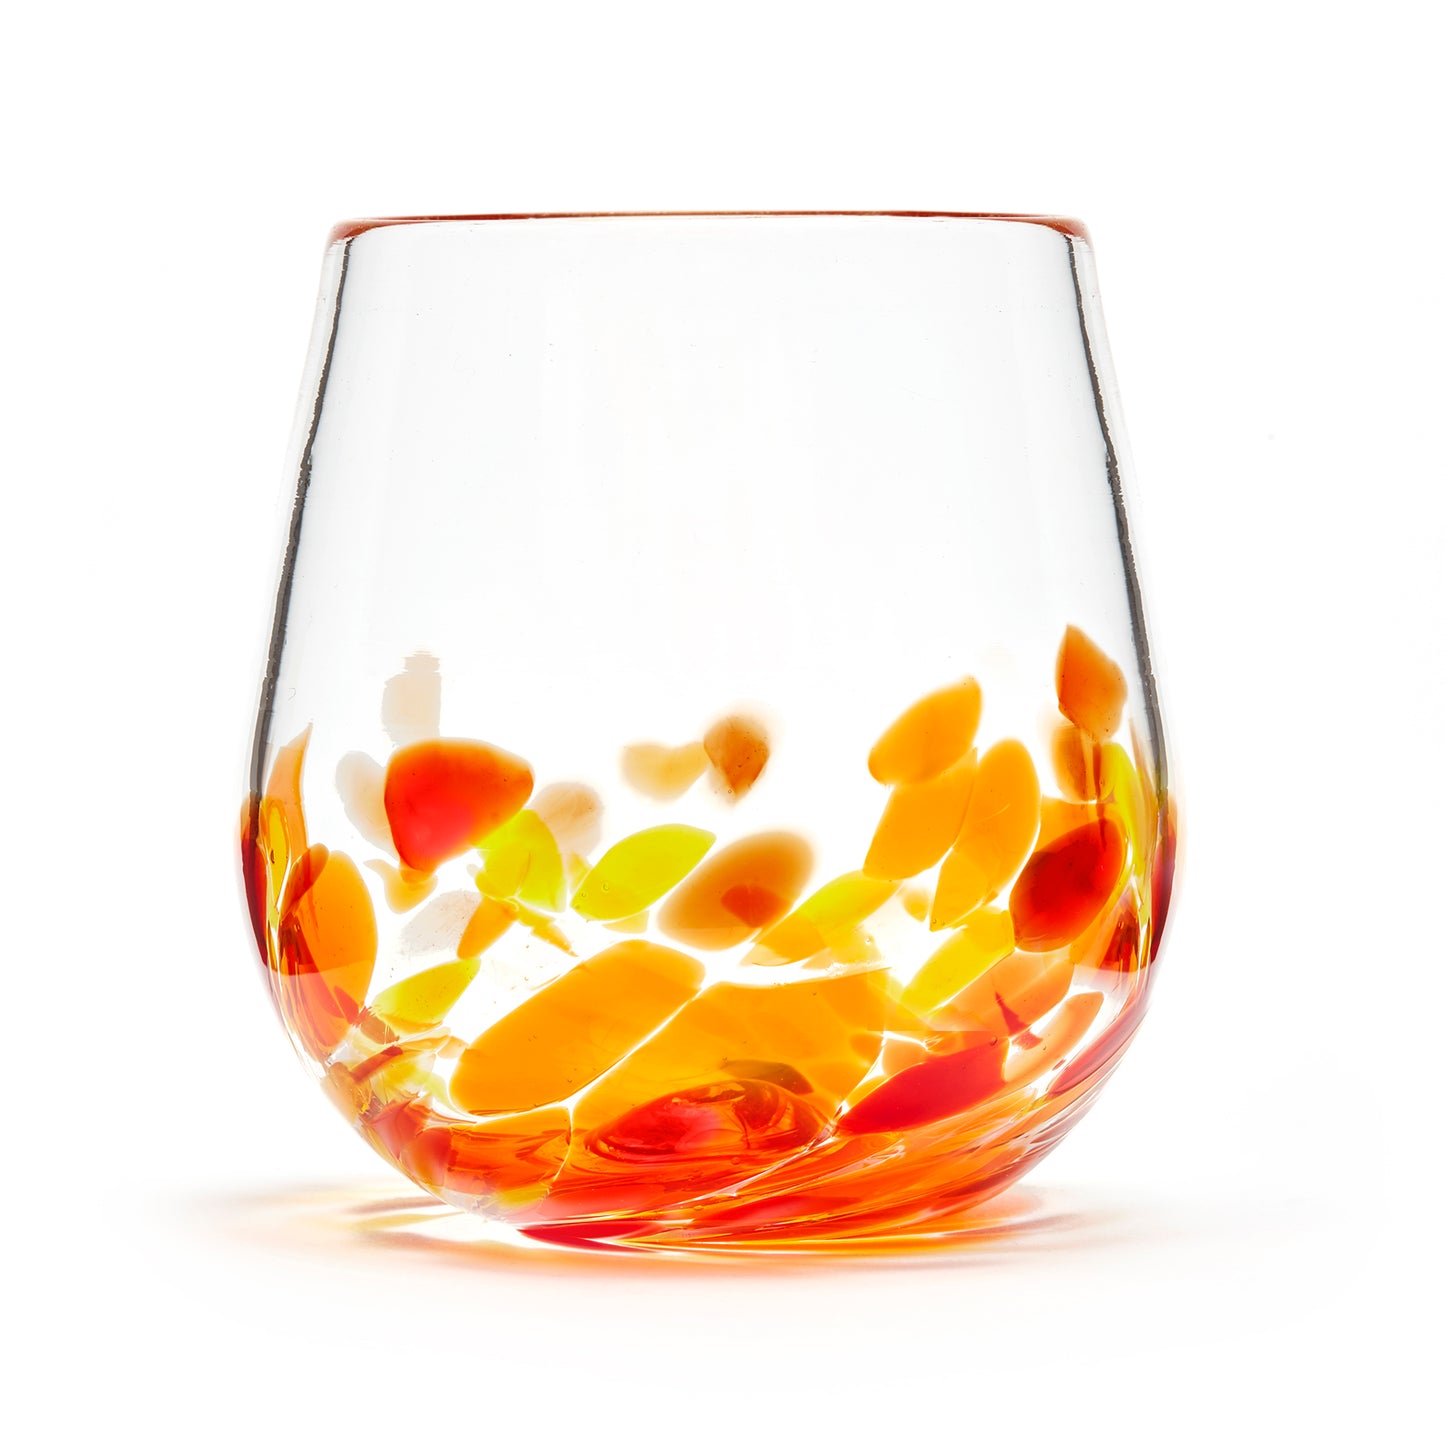 Hand blown glass wine glass. Clear glass with a swirl of red, yellow, and orange glass on the bottom. Colour combination is called "Sunburst."